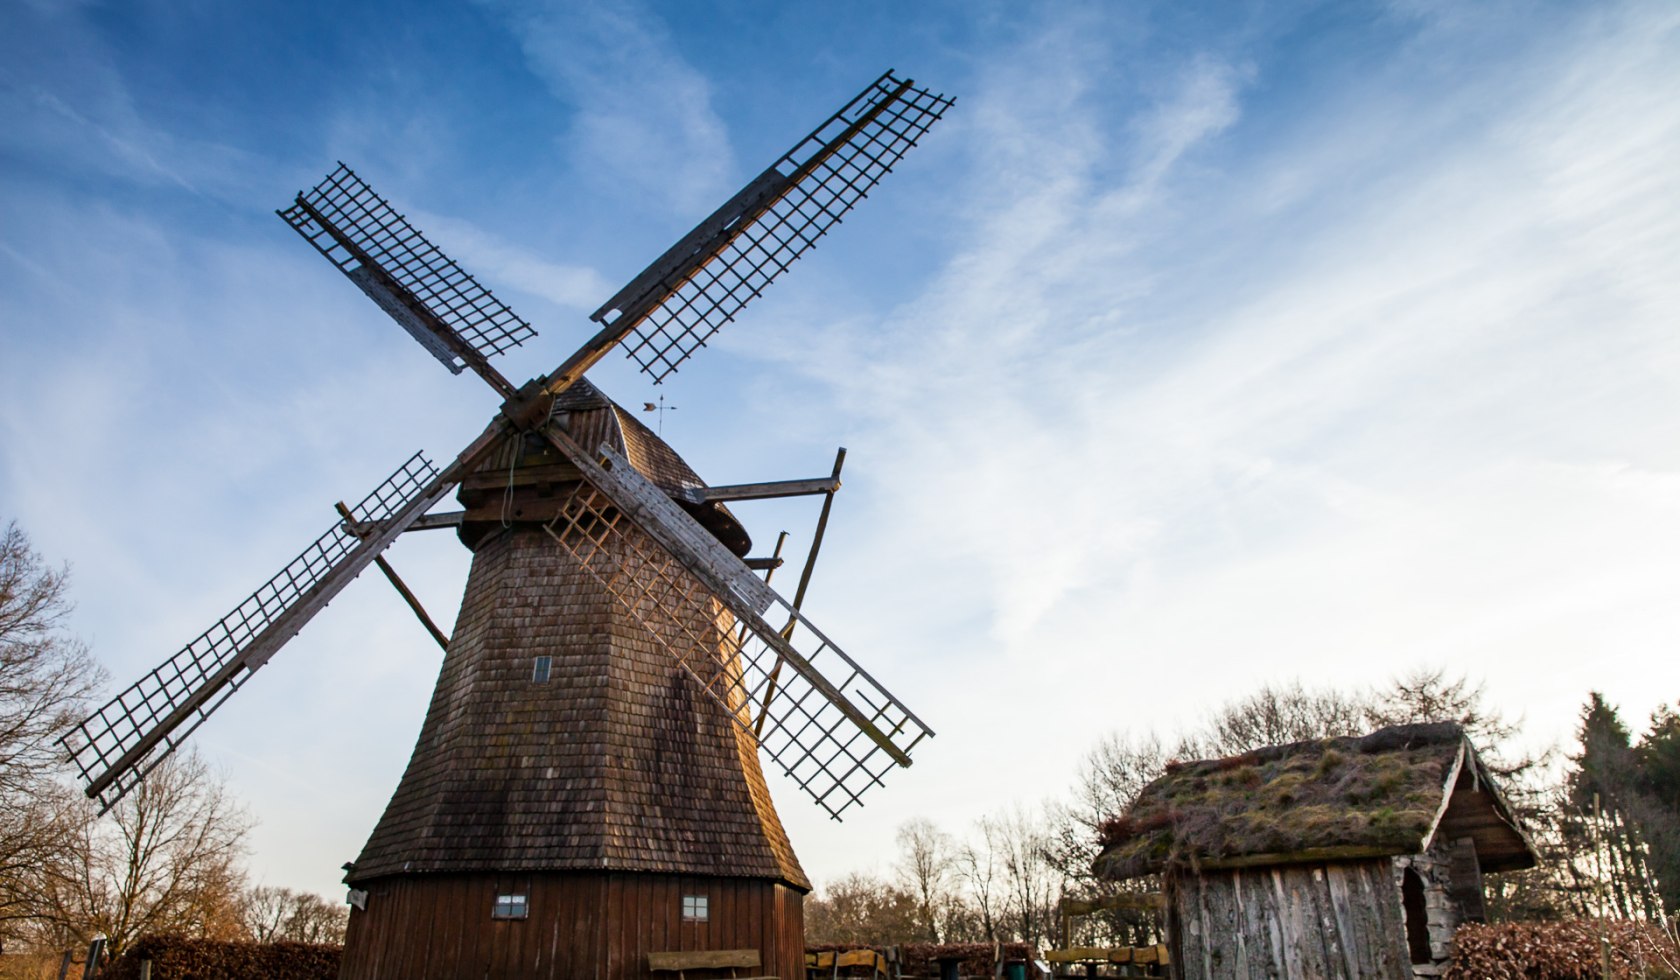 Gehlenberger windmill in the district of Cloppenburg, © malopo